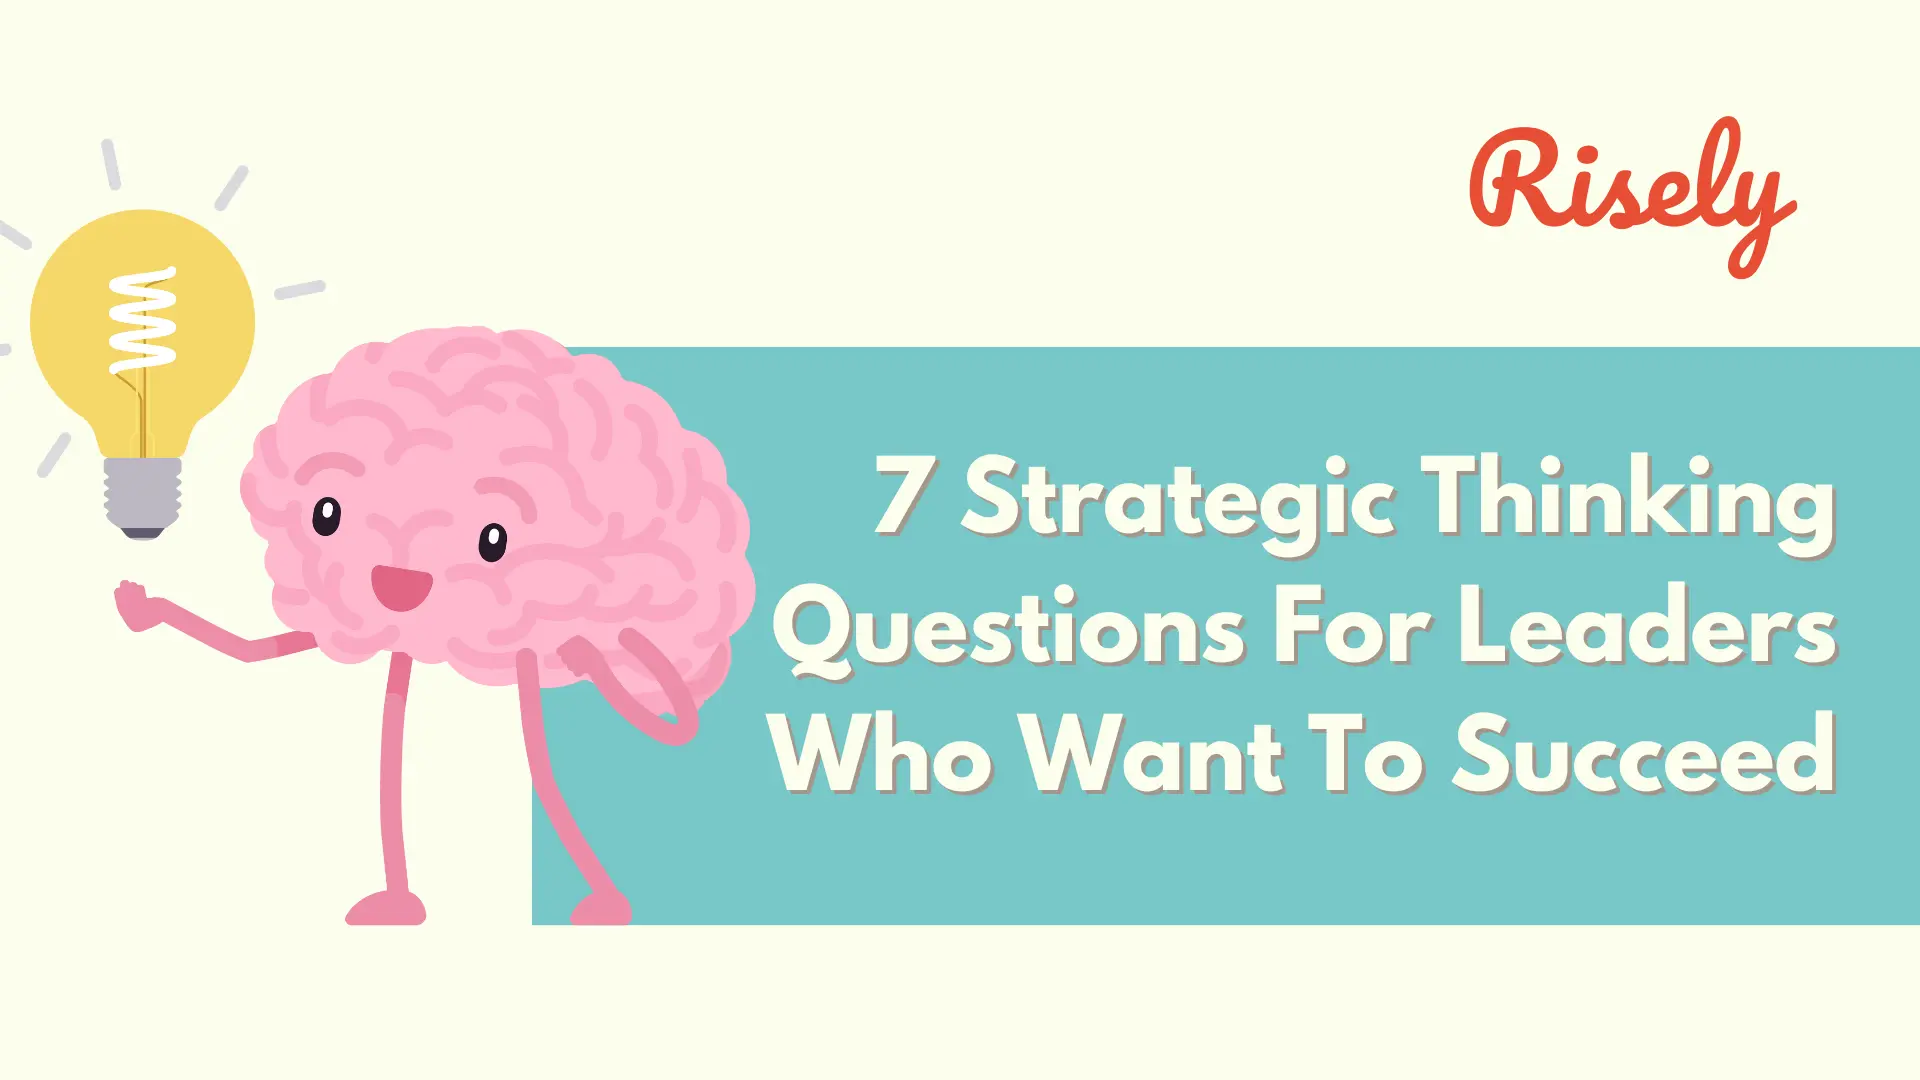 7 Strategic Thinking Questions For Leaders Who Want To Succeed